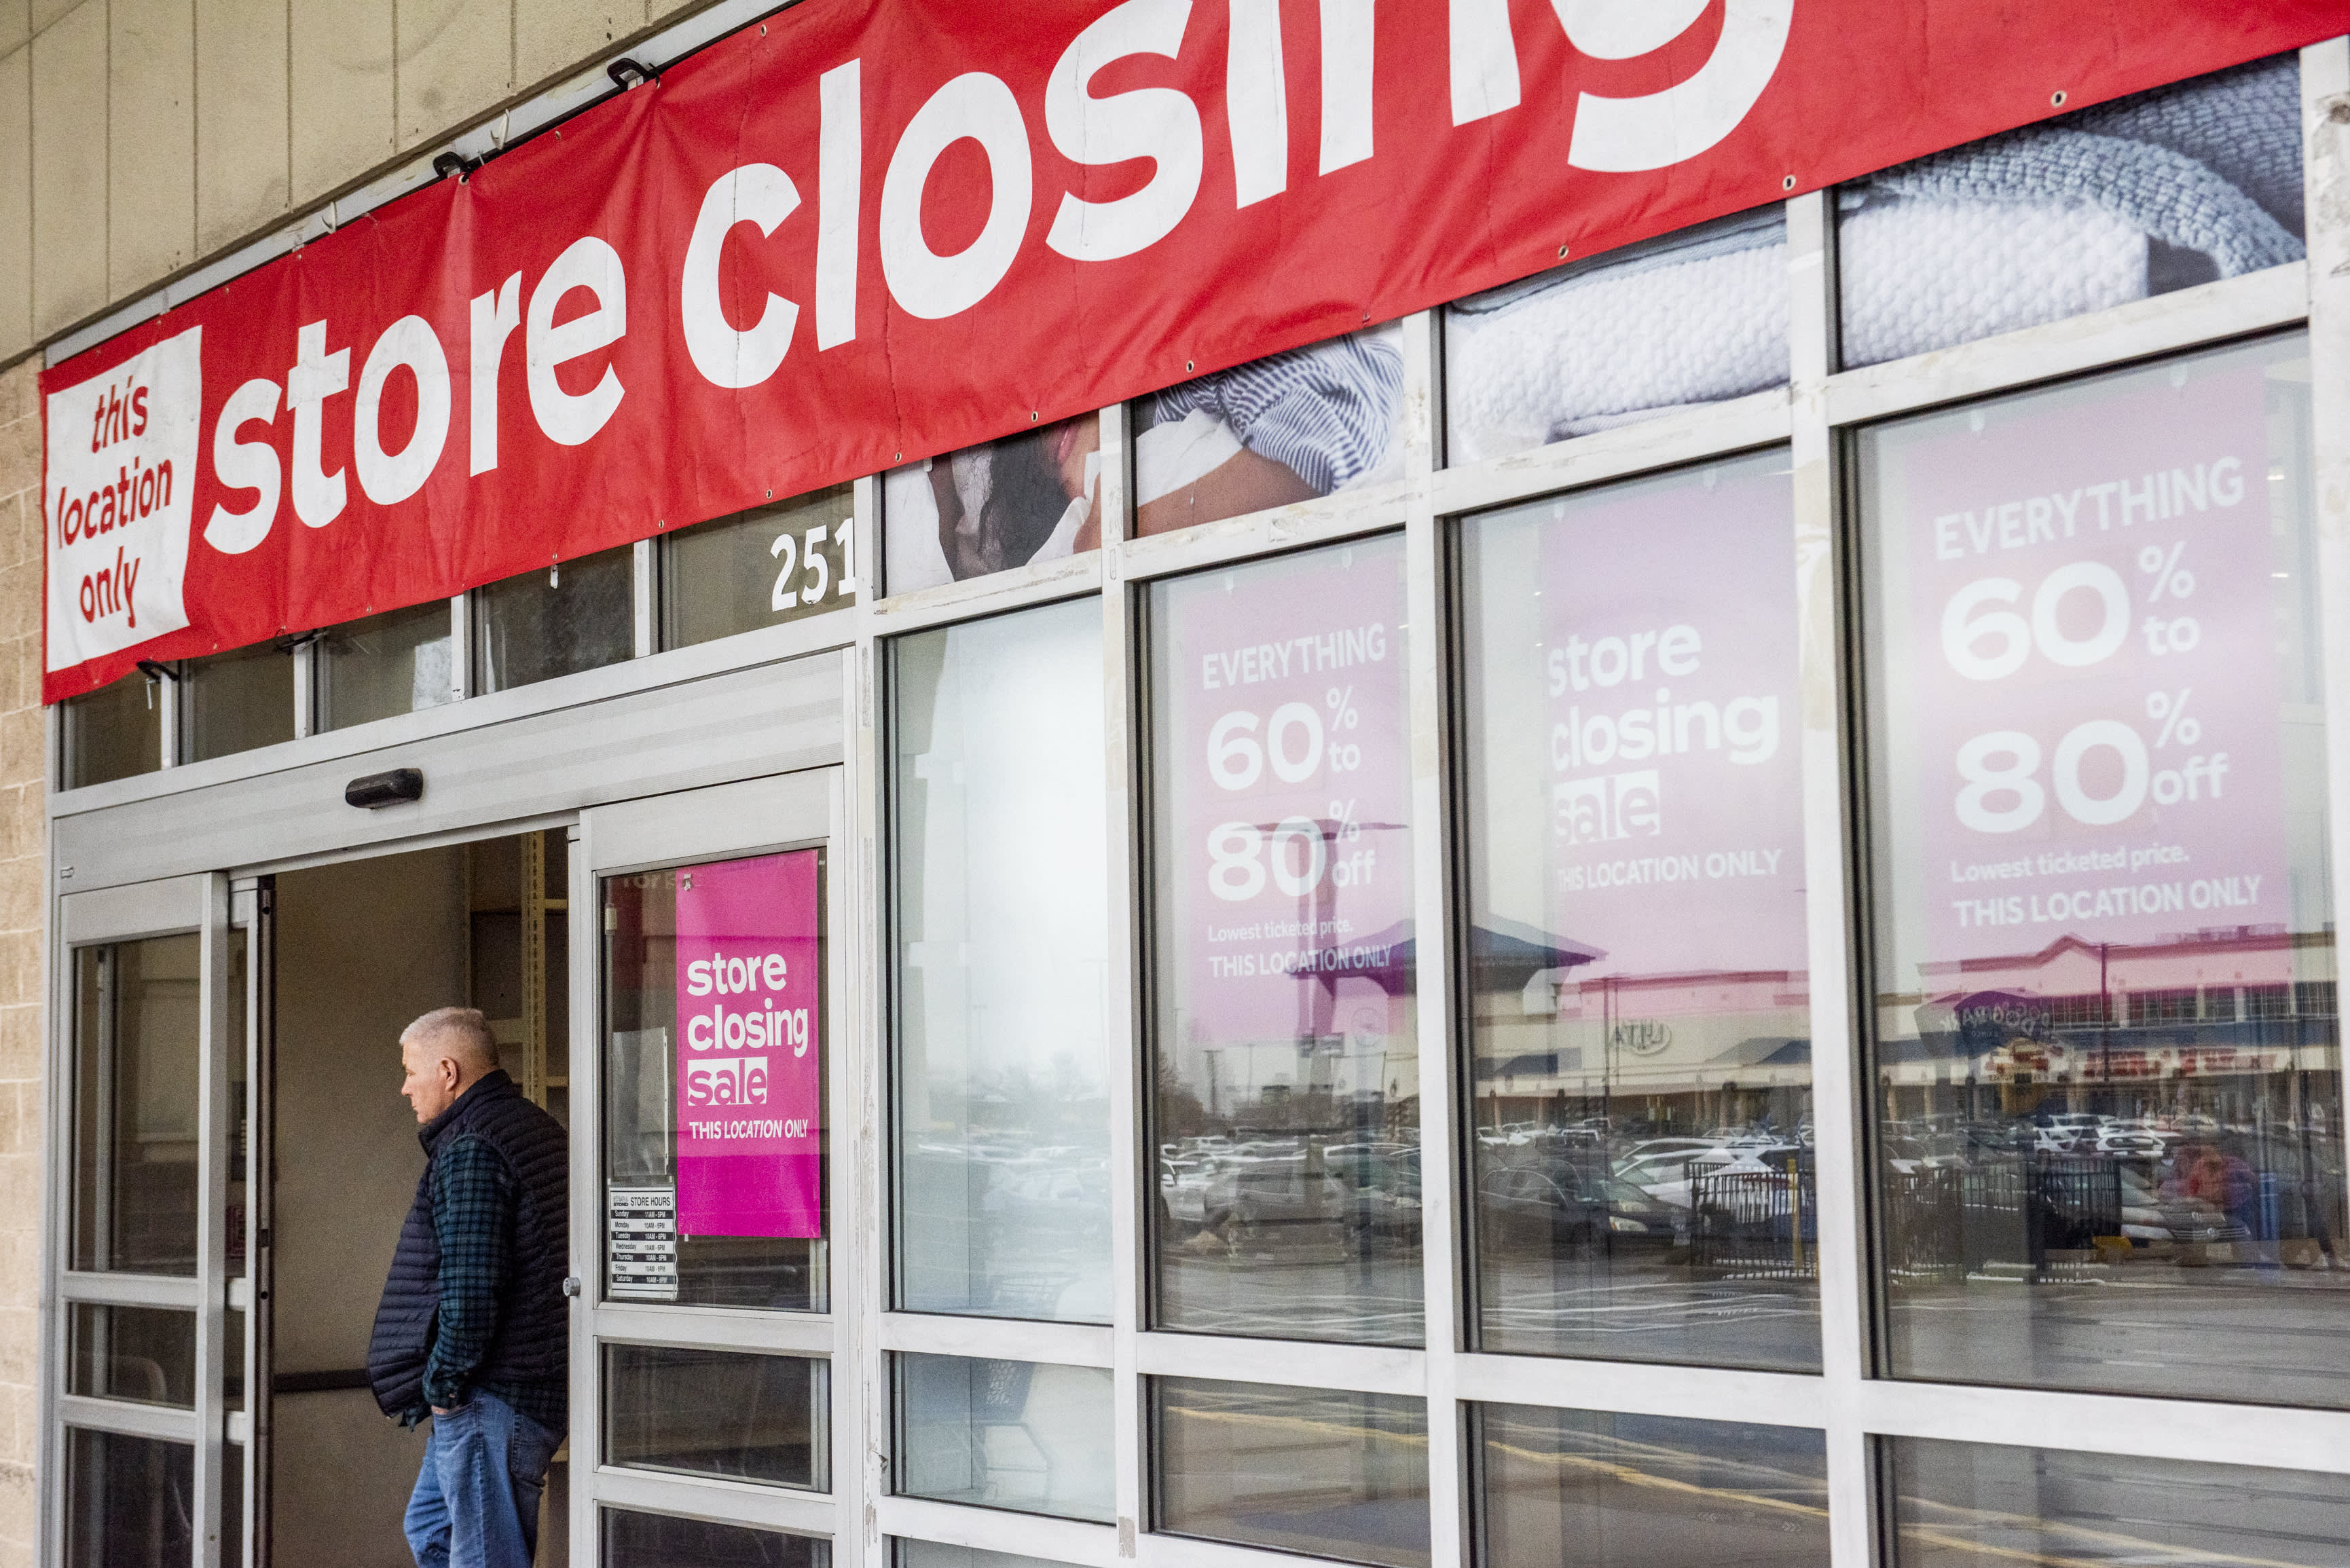 If Bed Bath & Beyond closes more stores, these companies could benefit the most